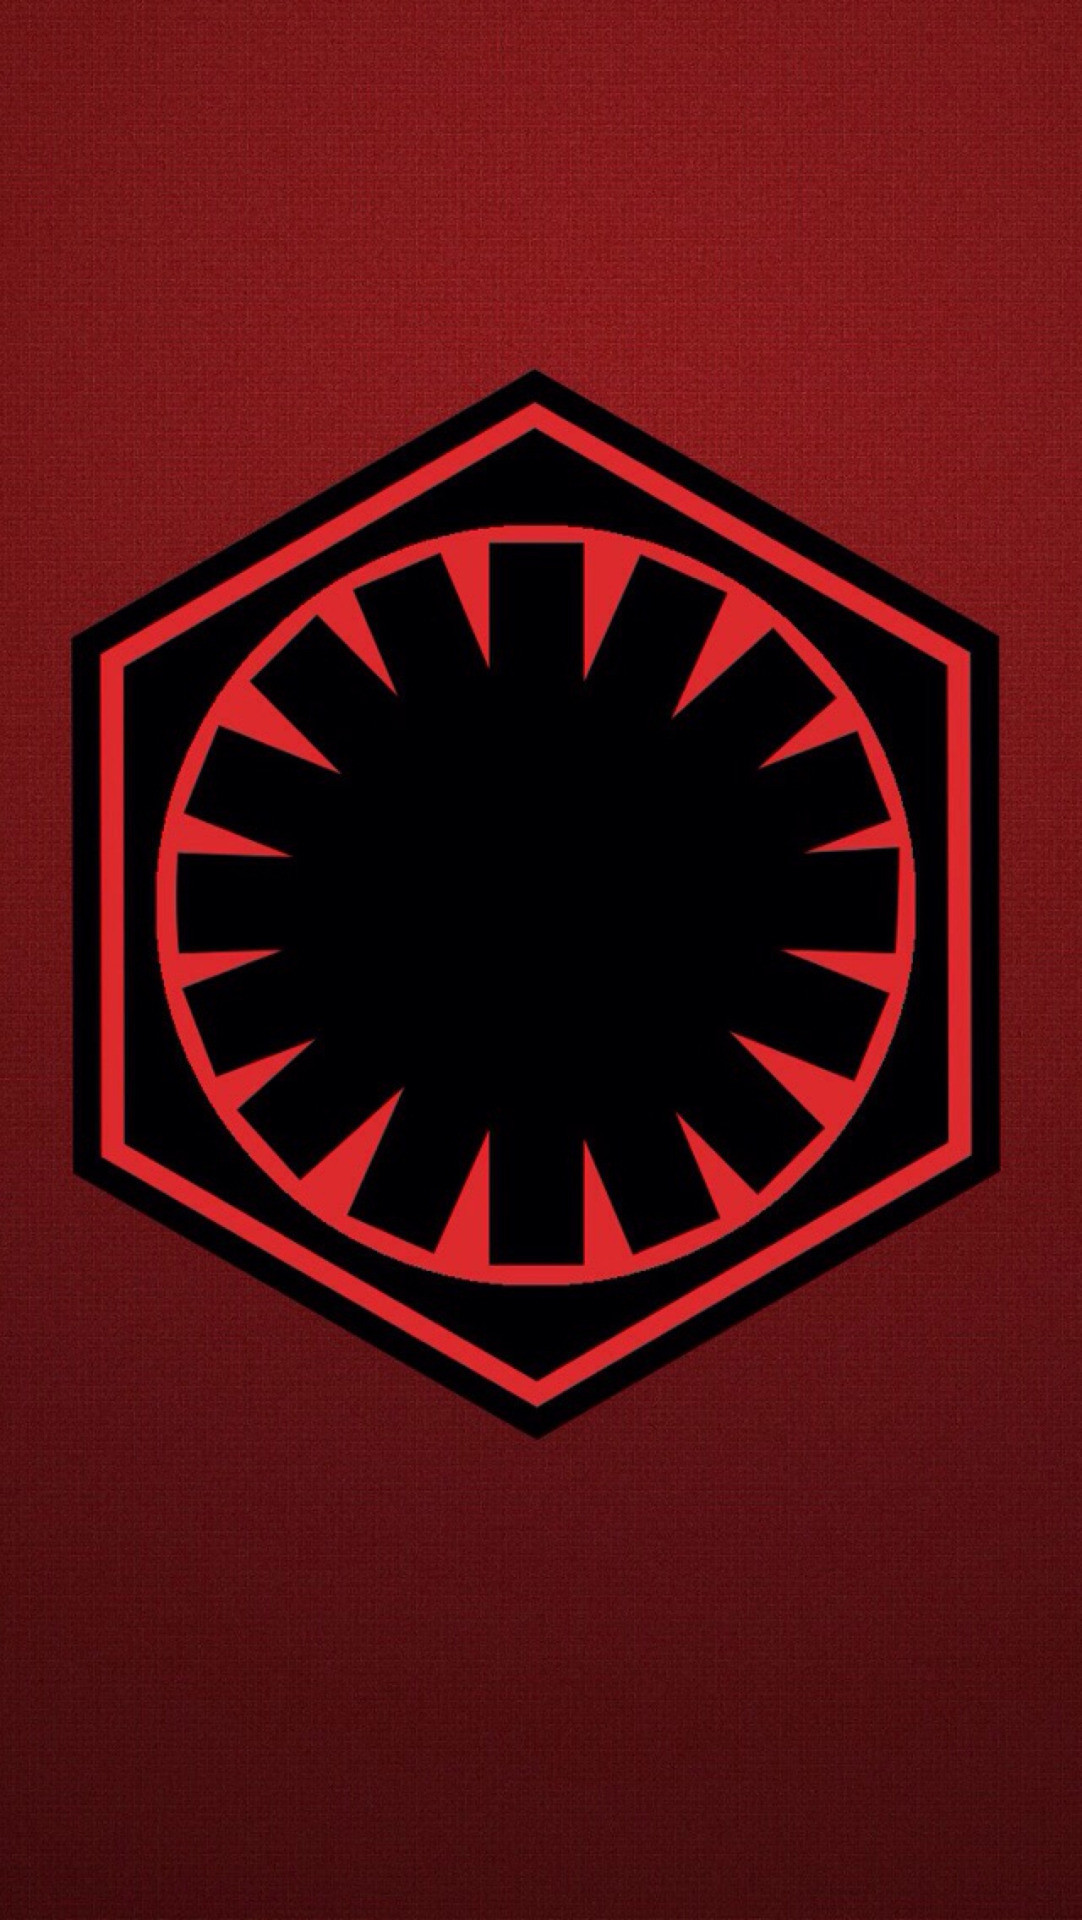 1082x1920 First Order iPhone wallpaper. I thought you all would enjoy! Happy